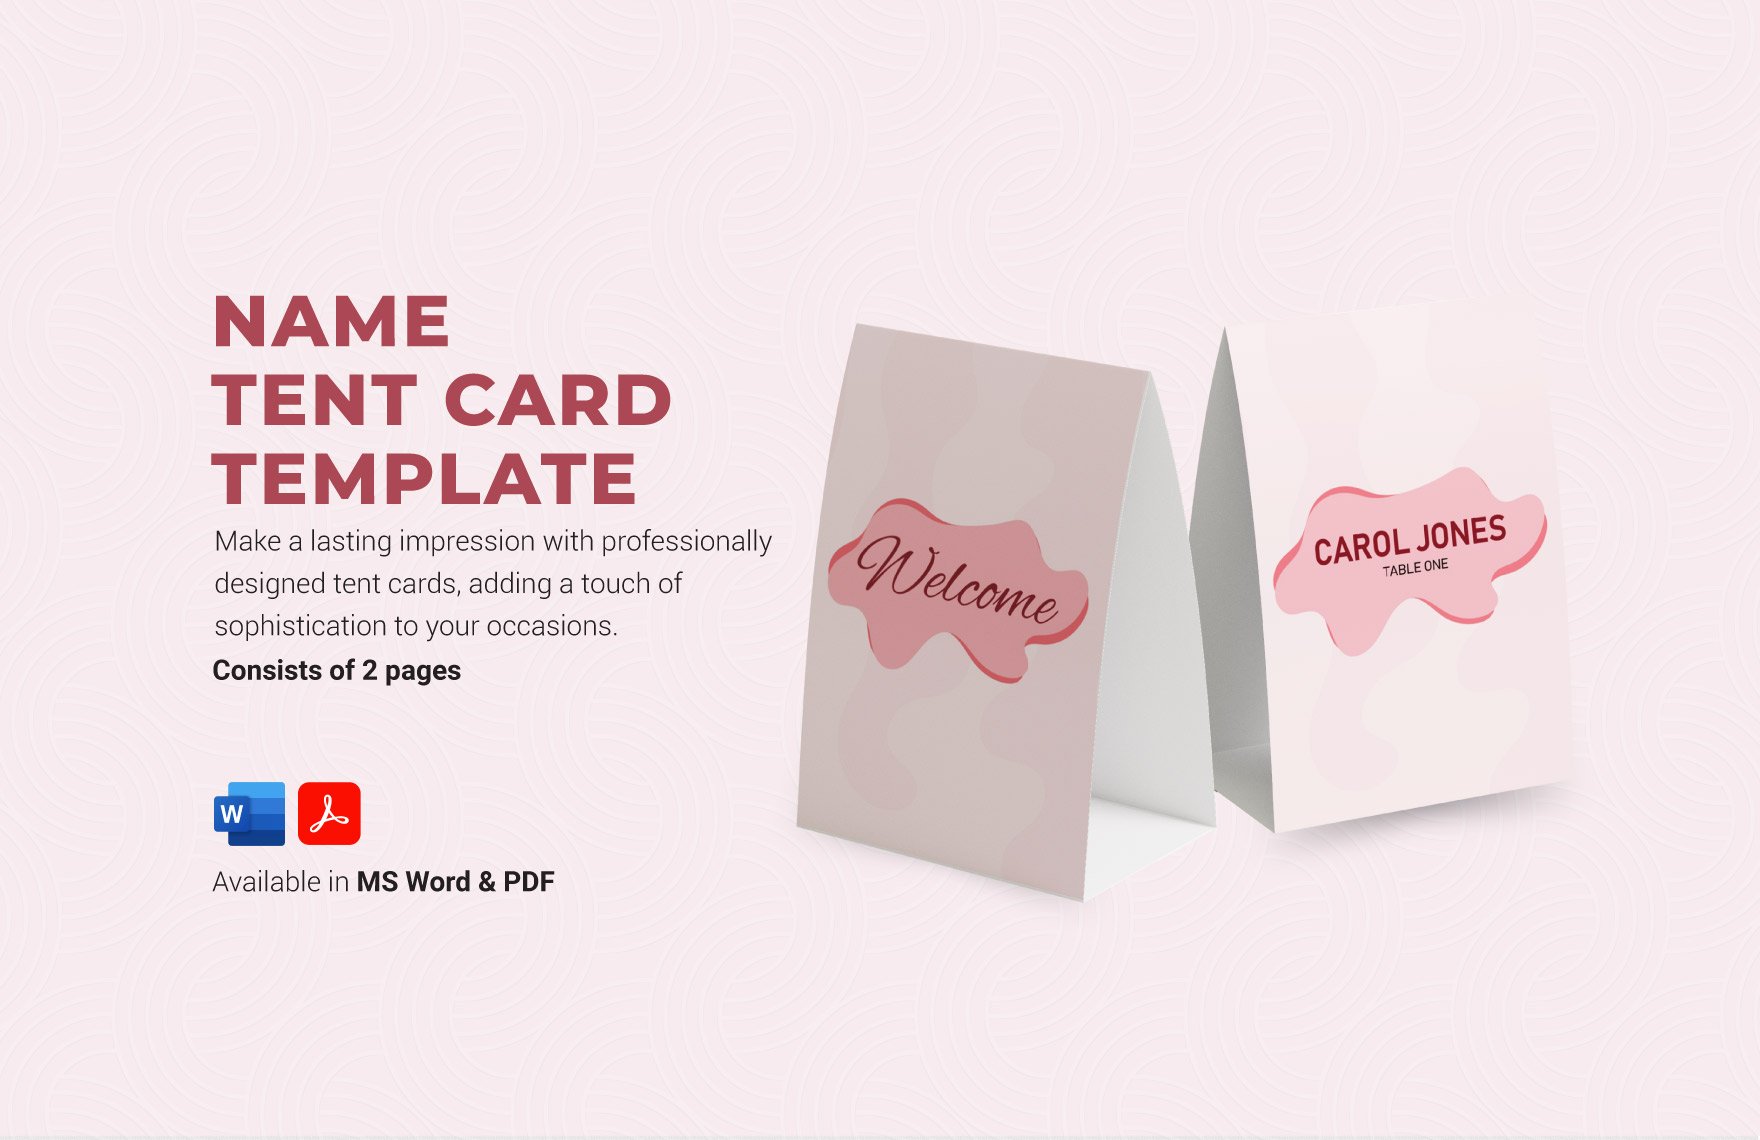 Name Tent Card Template